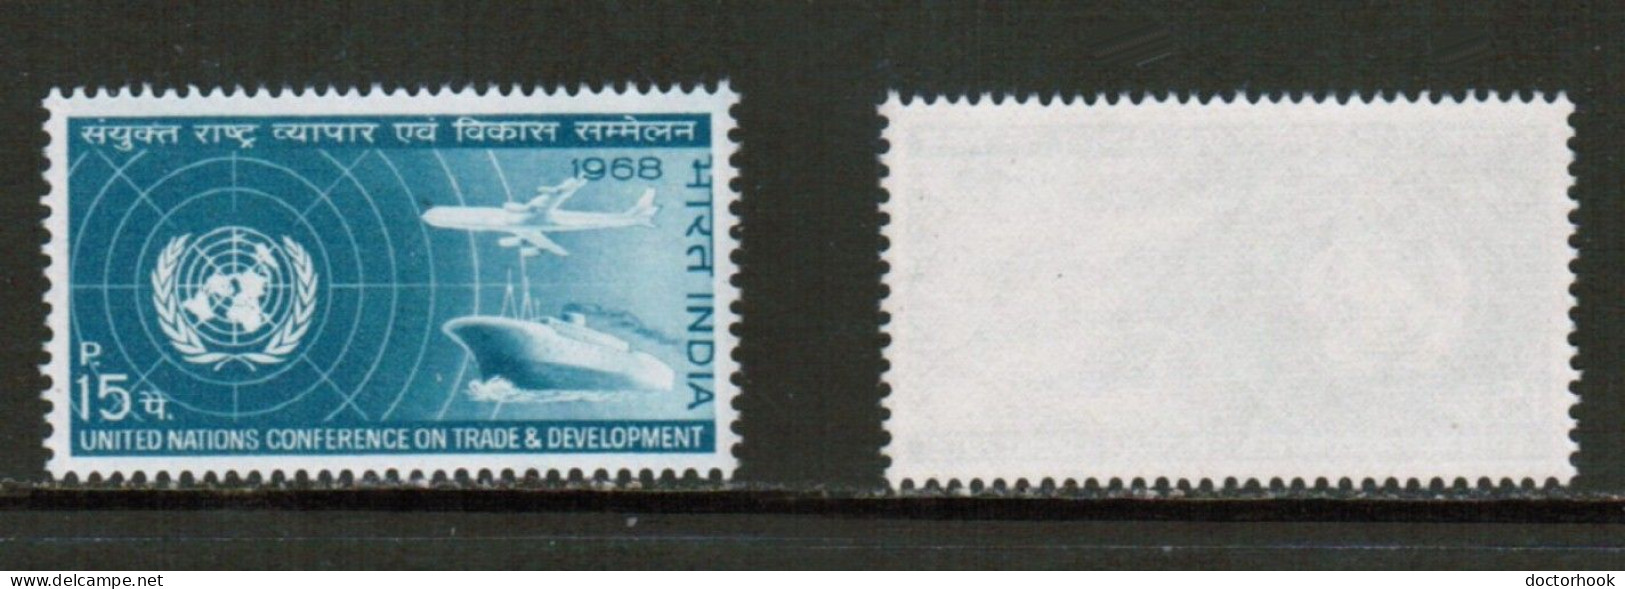 INDIA   Scott # 463** MINT NH (CONDITION AS PER SCAN) (Stamp Scan # 919-9) - Unused Stamps